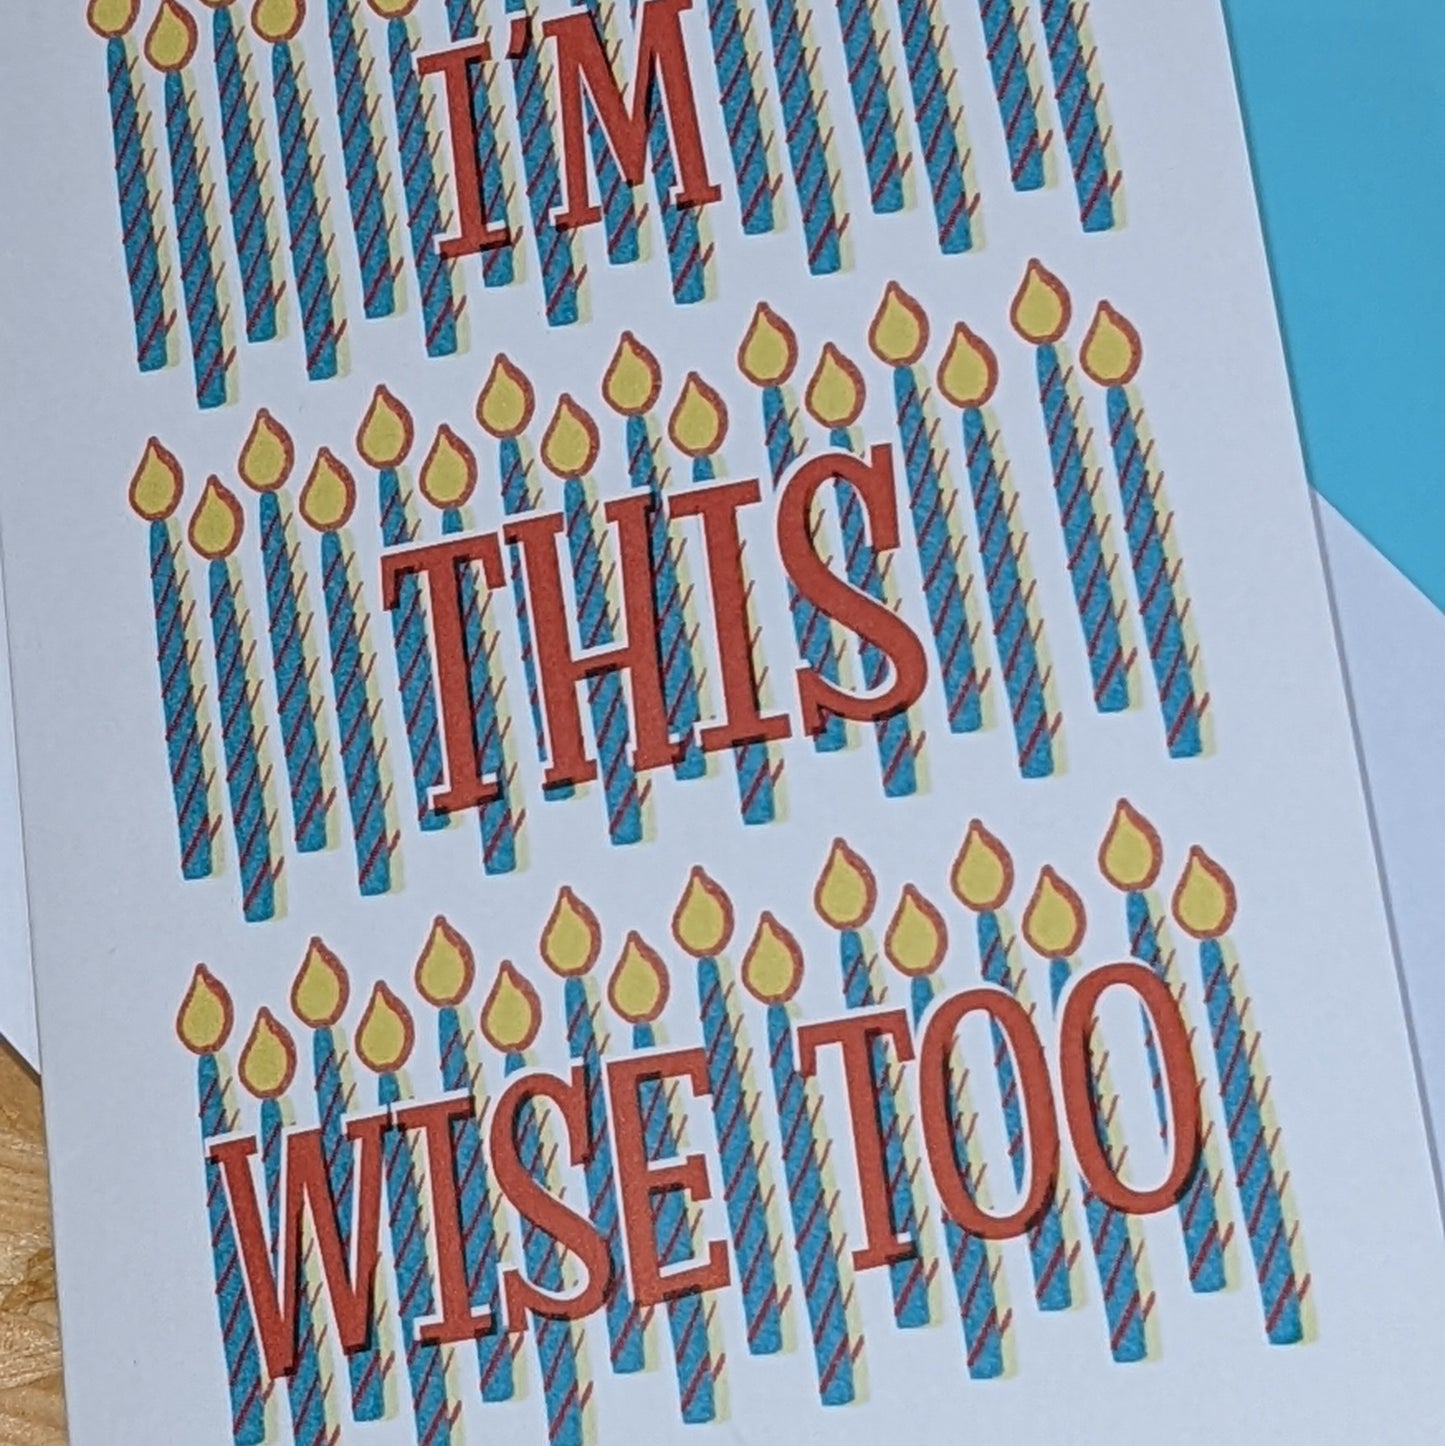 I'm this wise too card